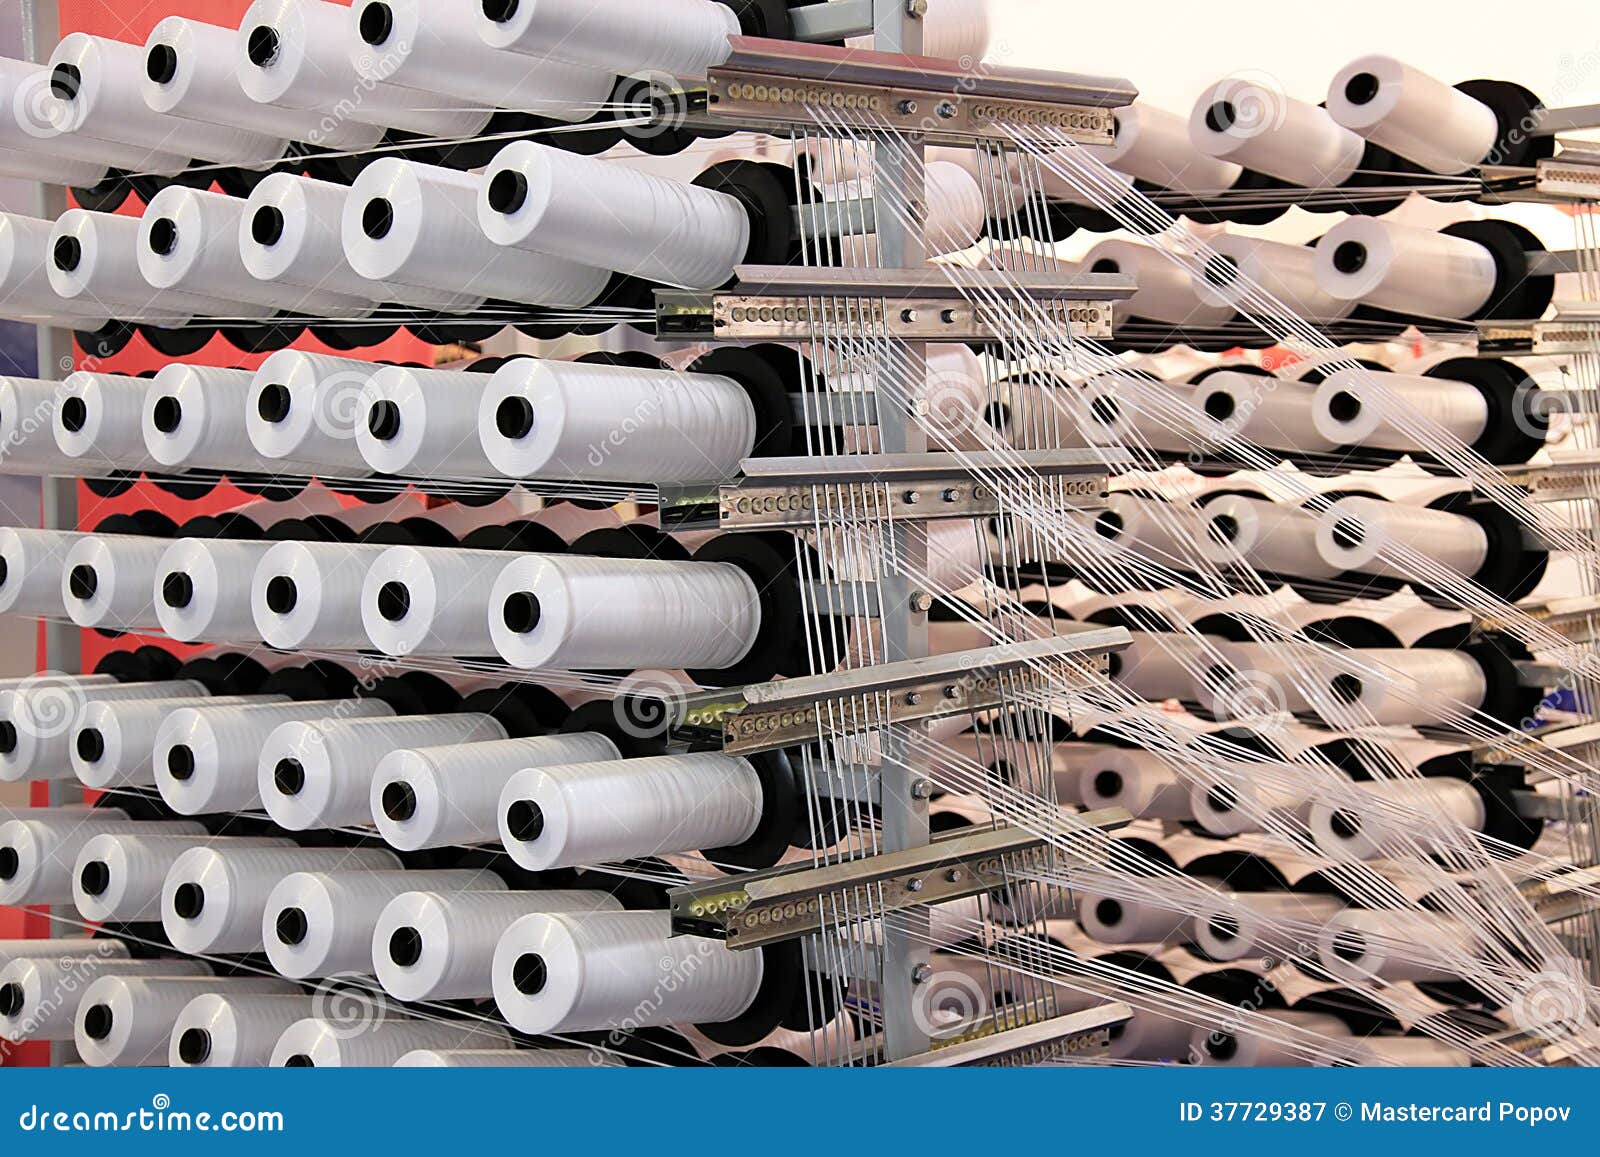 Yarn Warping Machine In A Textile Weaving Factory Stock Photo, Picture and  Royalty Free Image. Image 12753807.